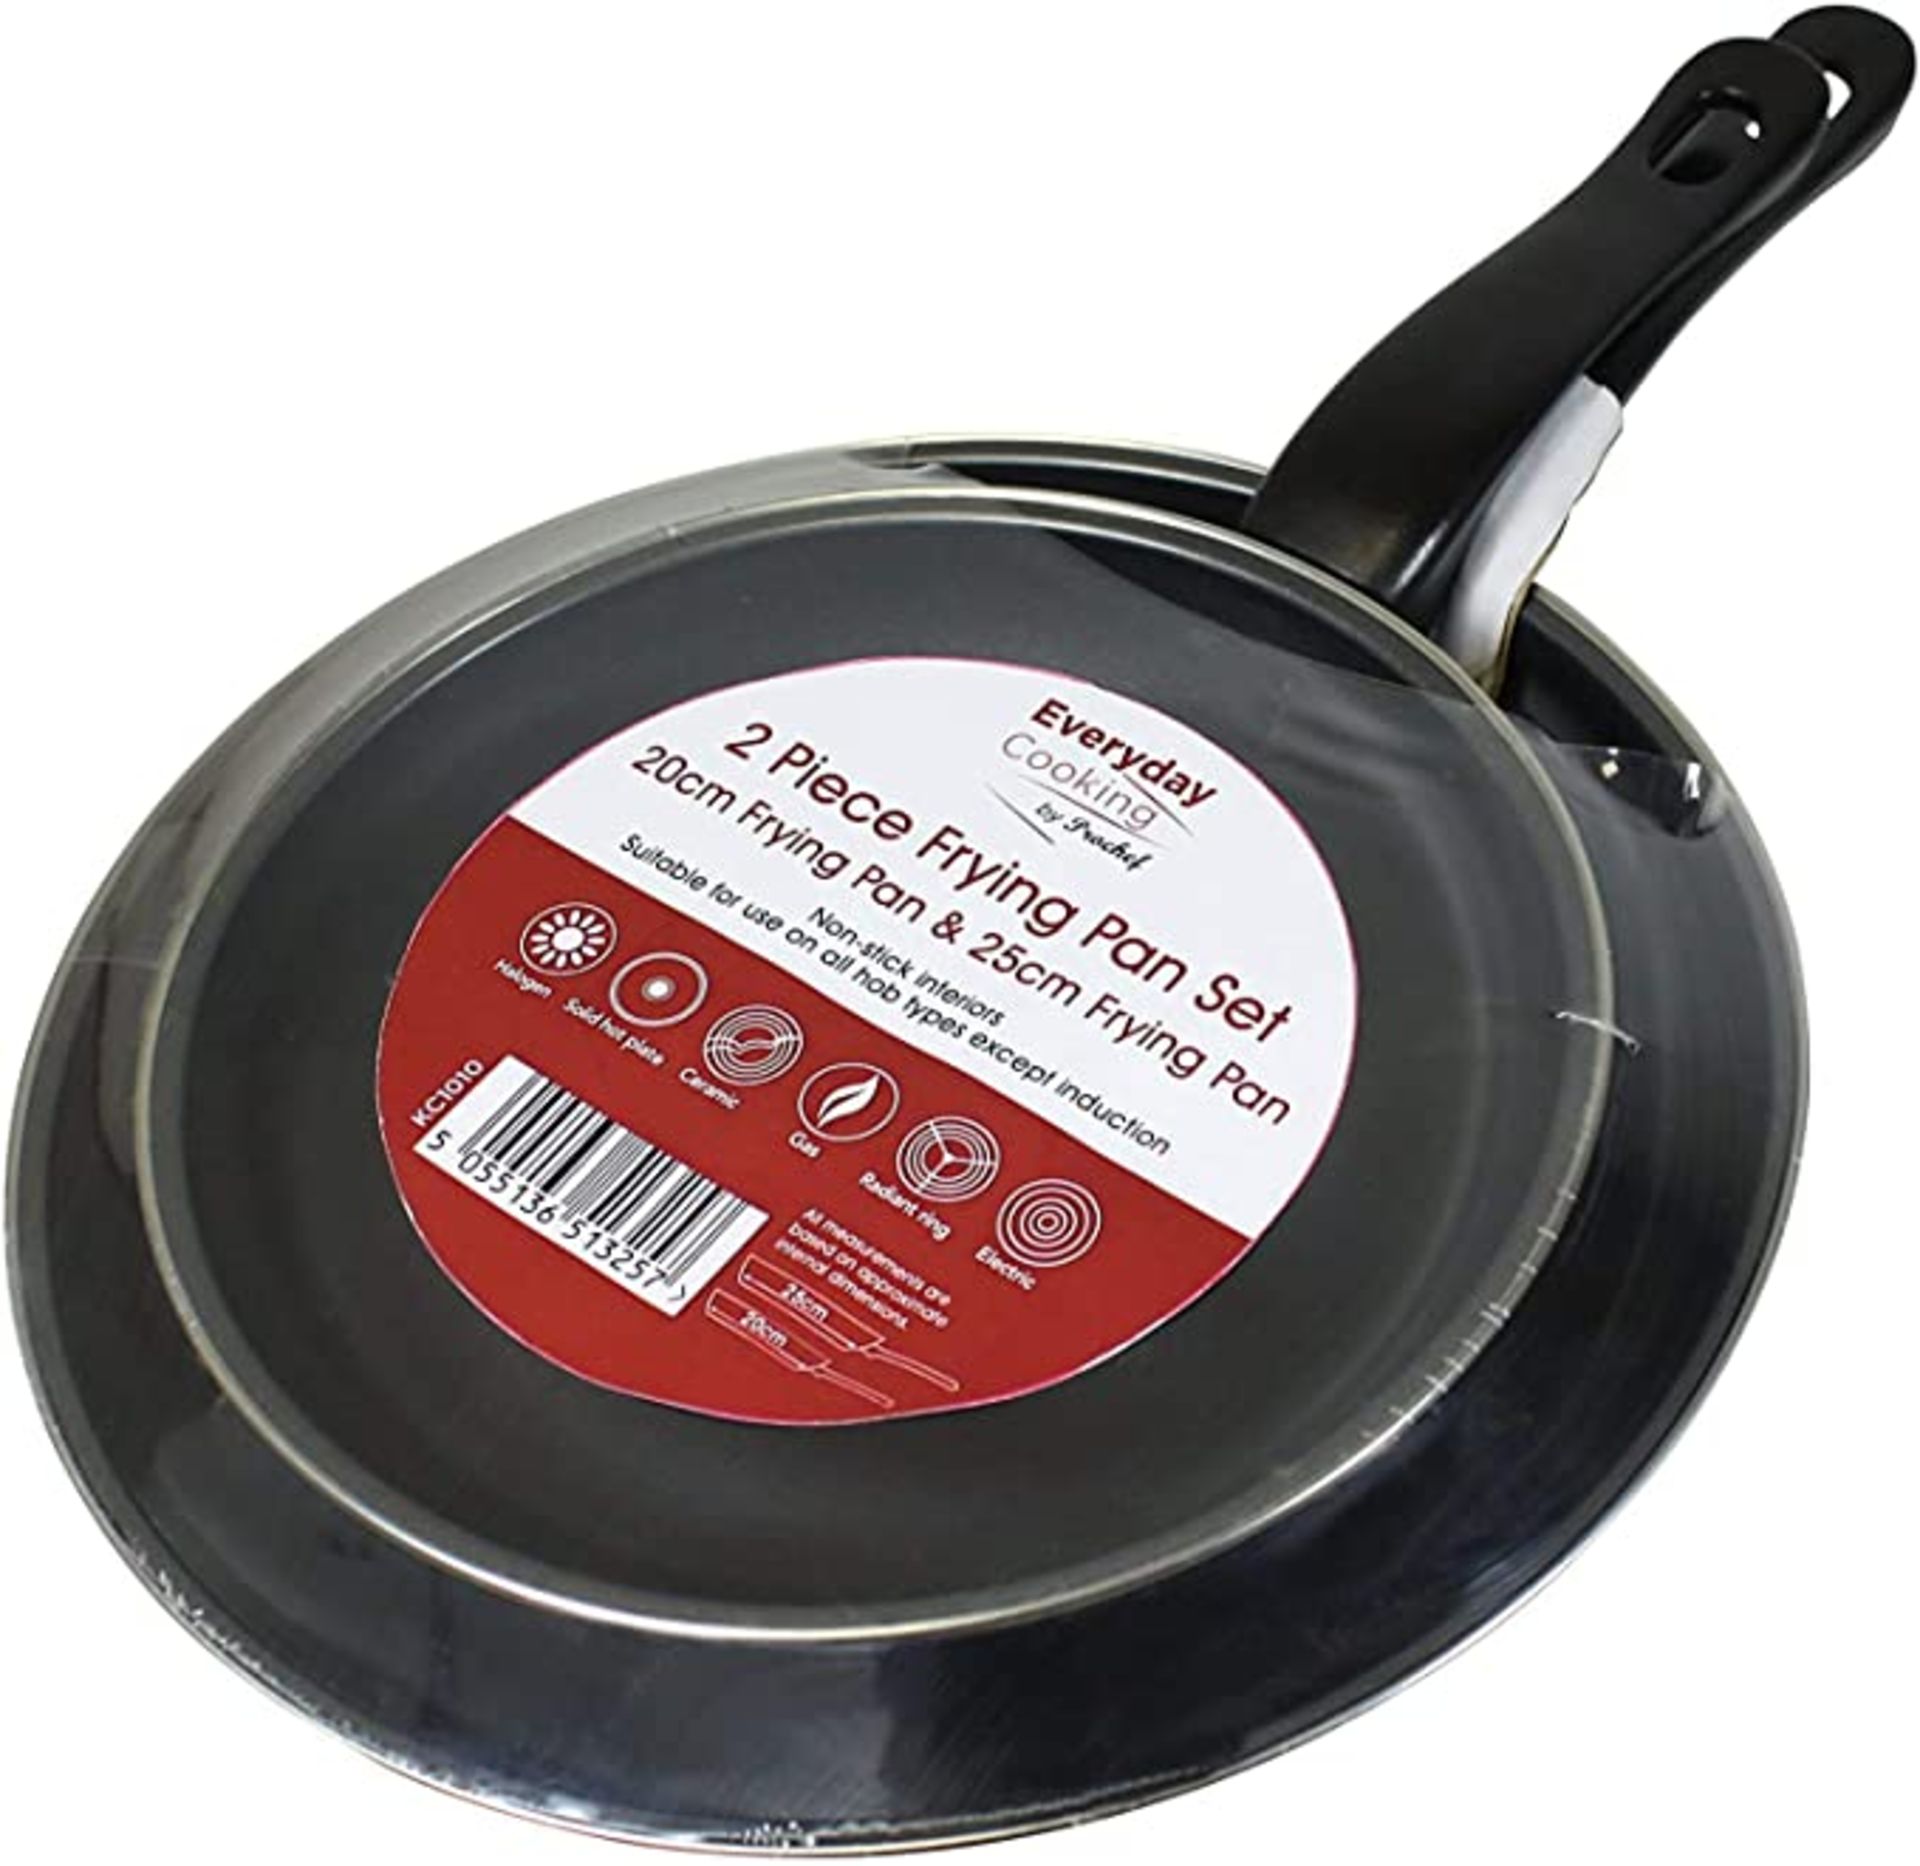 BRAND NEW EVERYDAY COOKING 2PC FRYING PAN SET